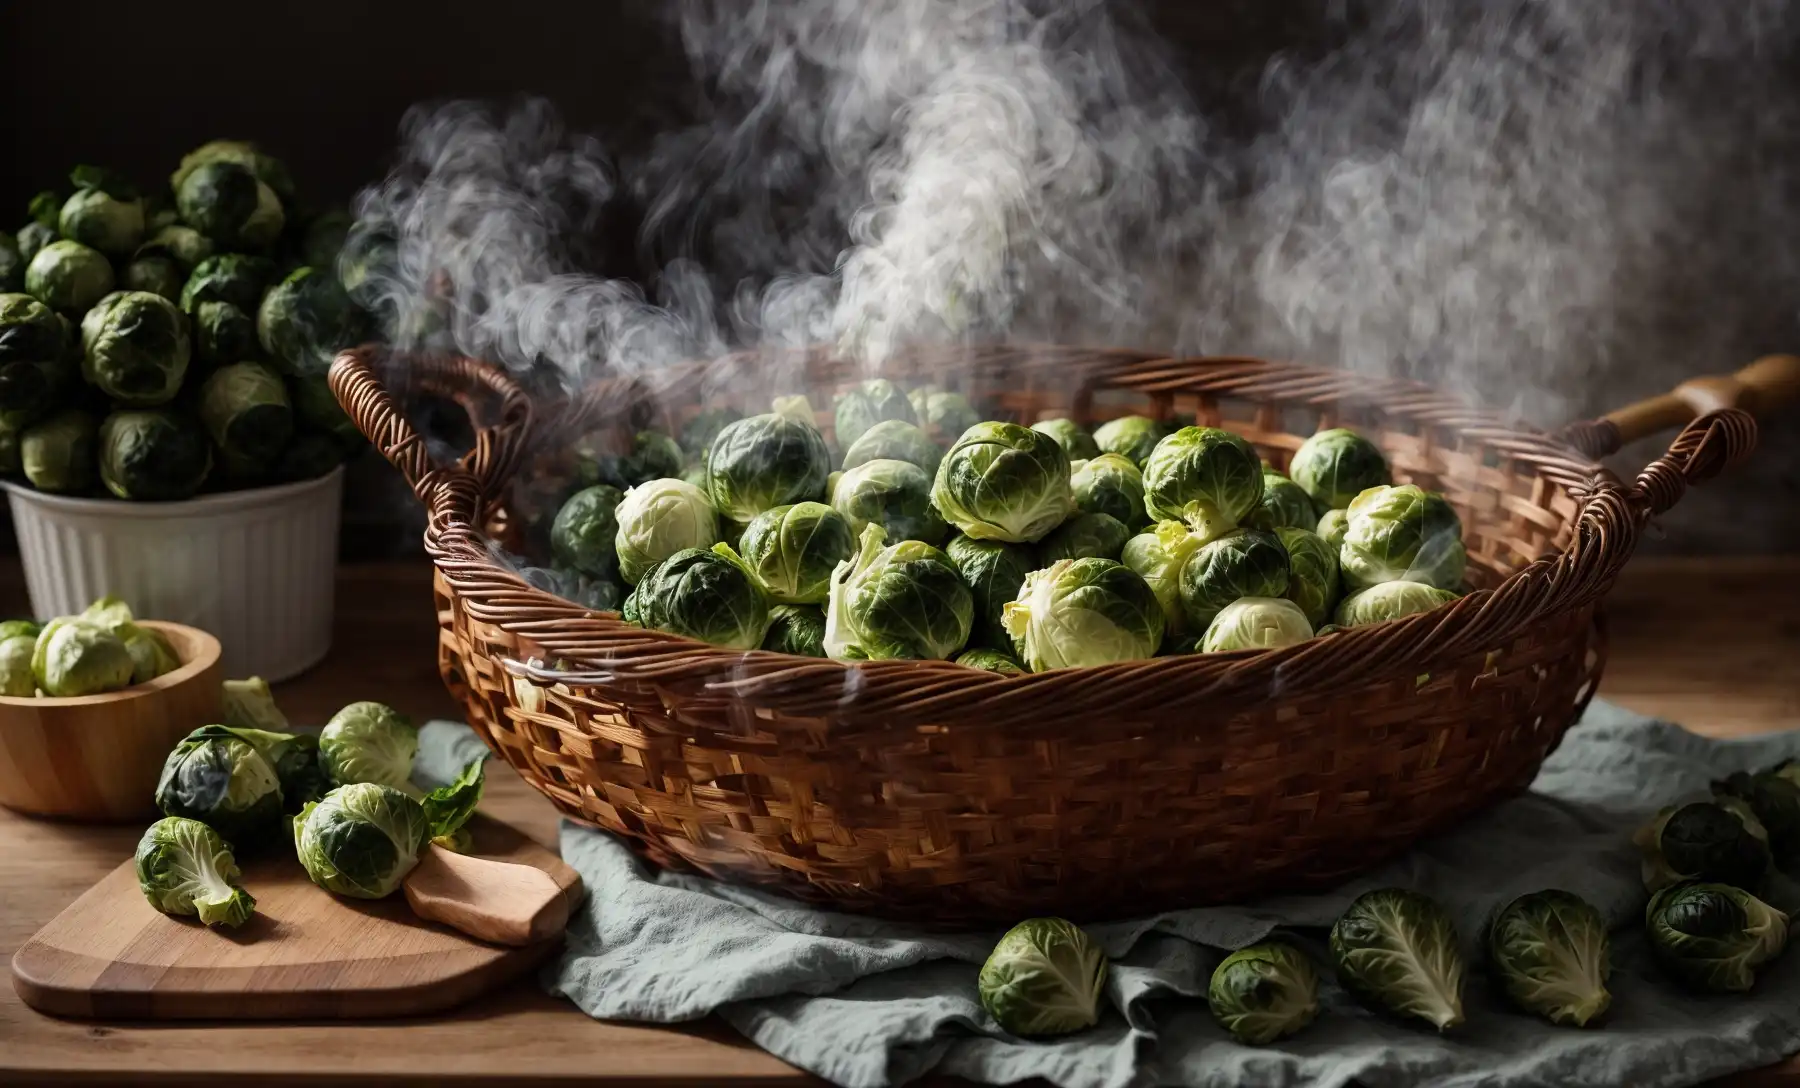 How to Steam Brussels Sprouts